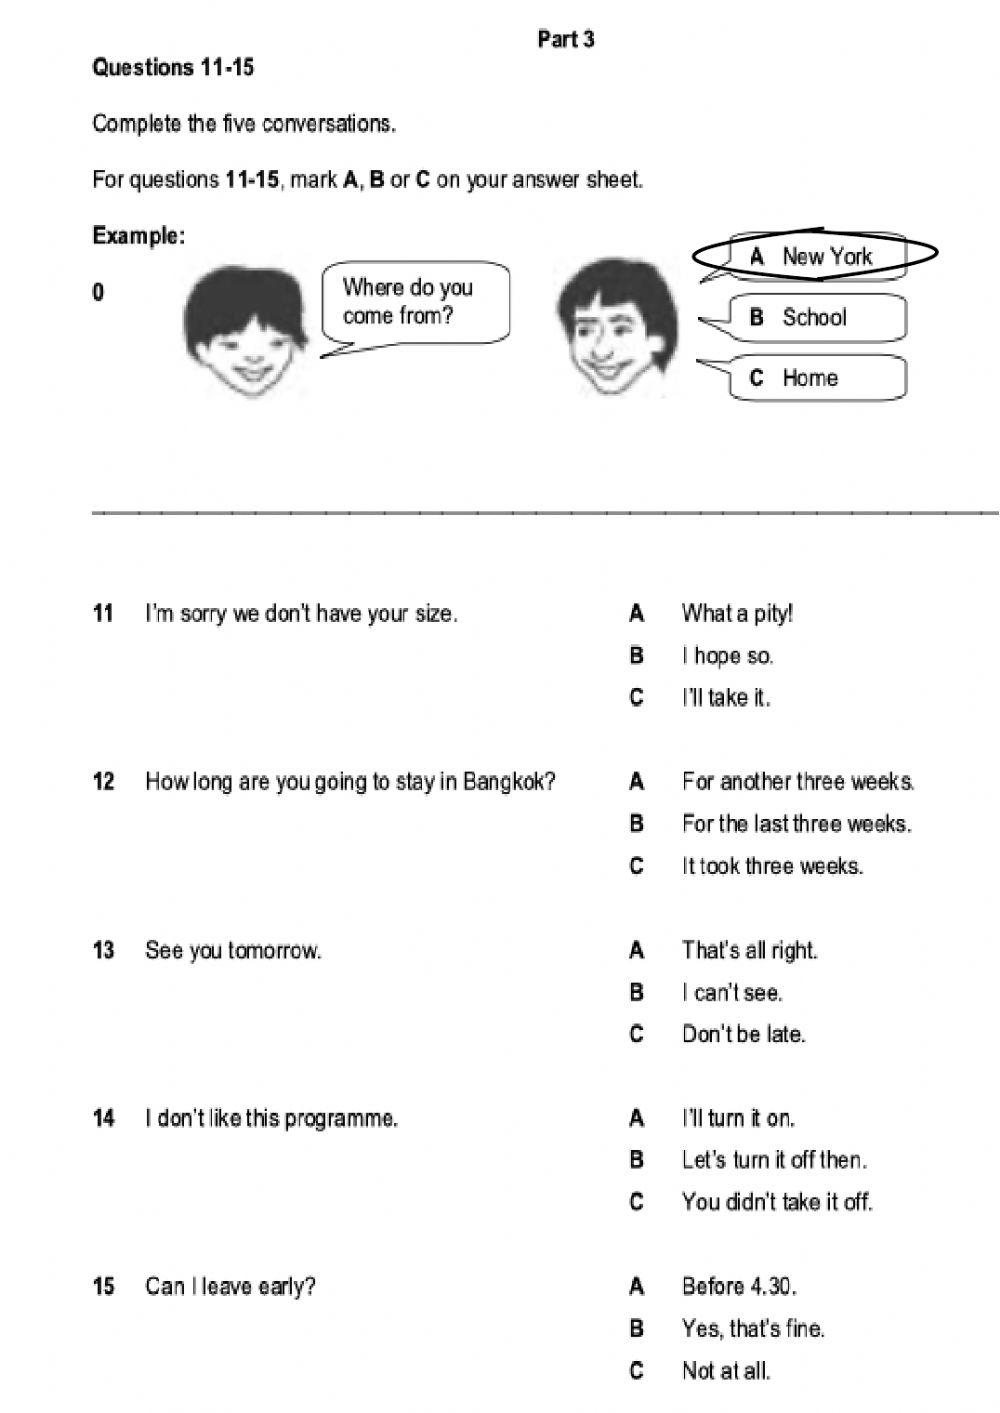 General use of English KET TEST - Reading